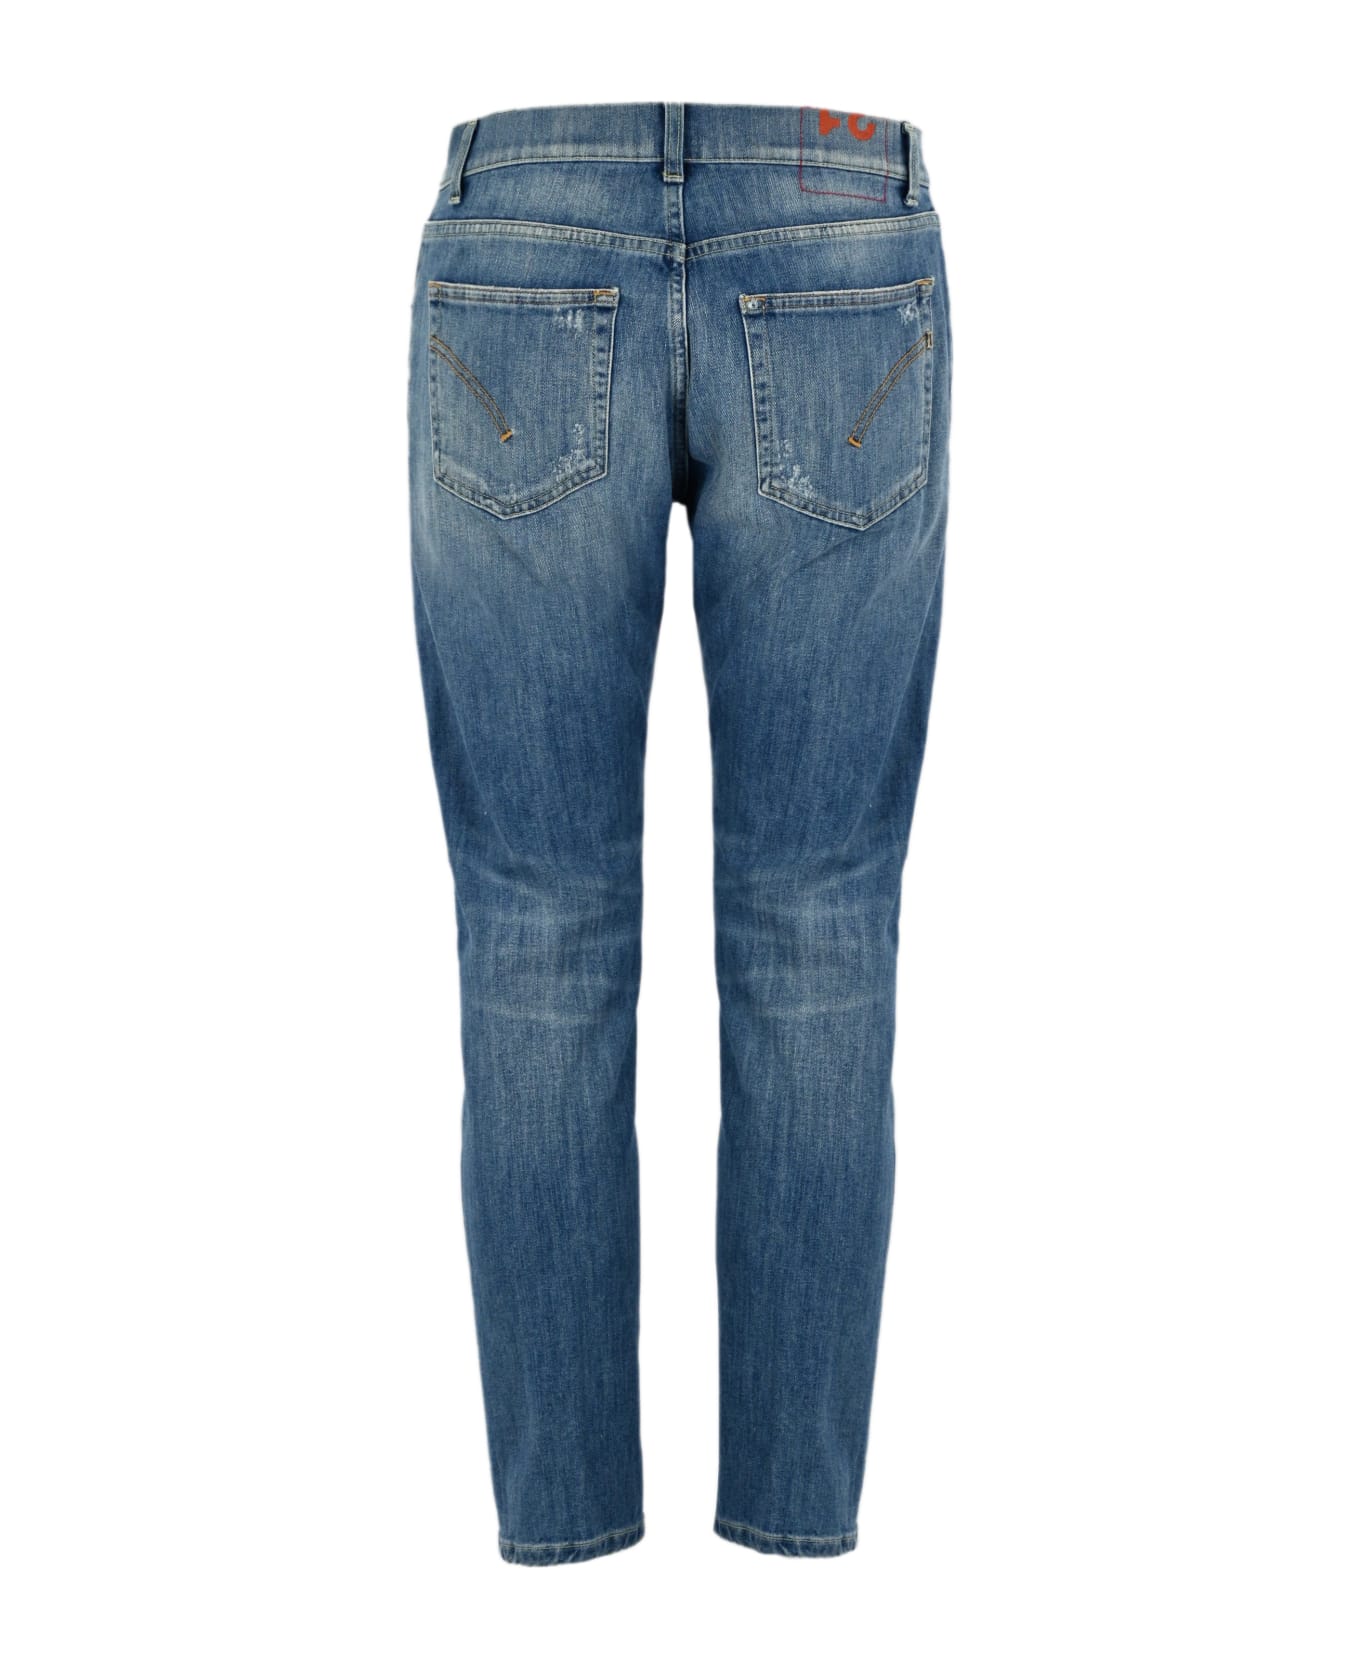 Dondup Dian Jeans In Carrot Fit Cotton - Denim